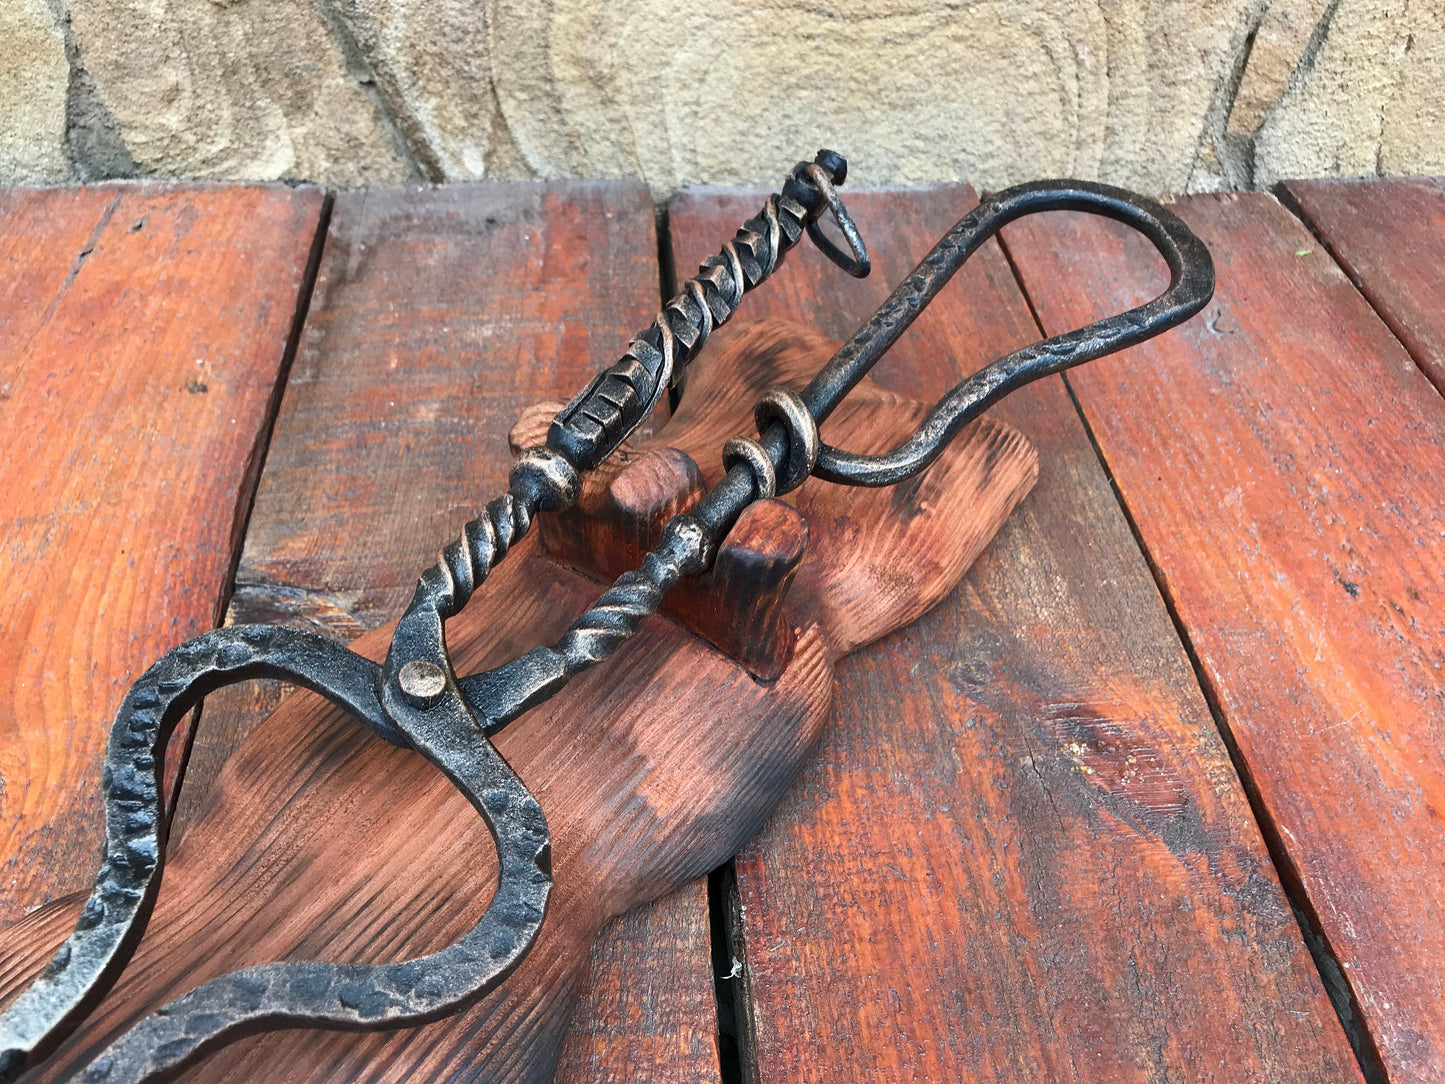 Fireplace tongs, tongs, personalized gift, tools, fireplace tool set, fireplace, fireplace accessories,fire poker,firewood holder,fire tools